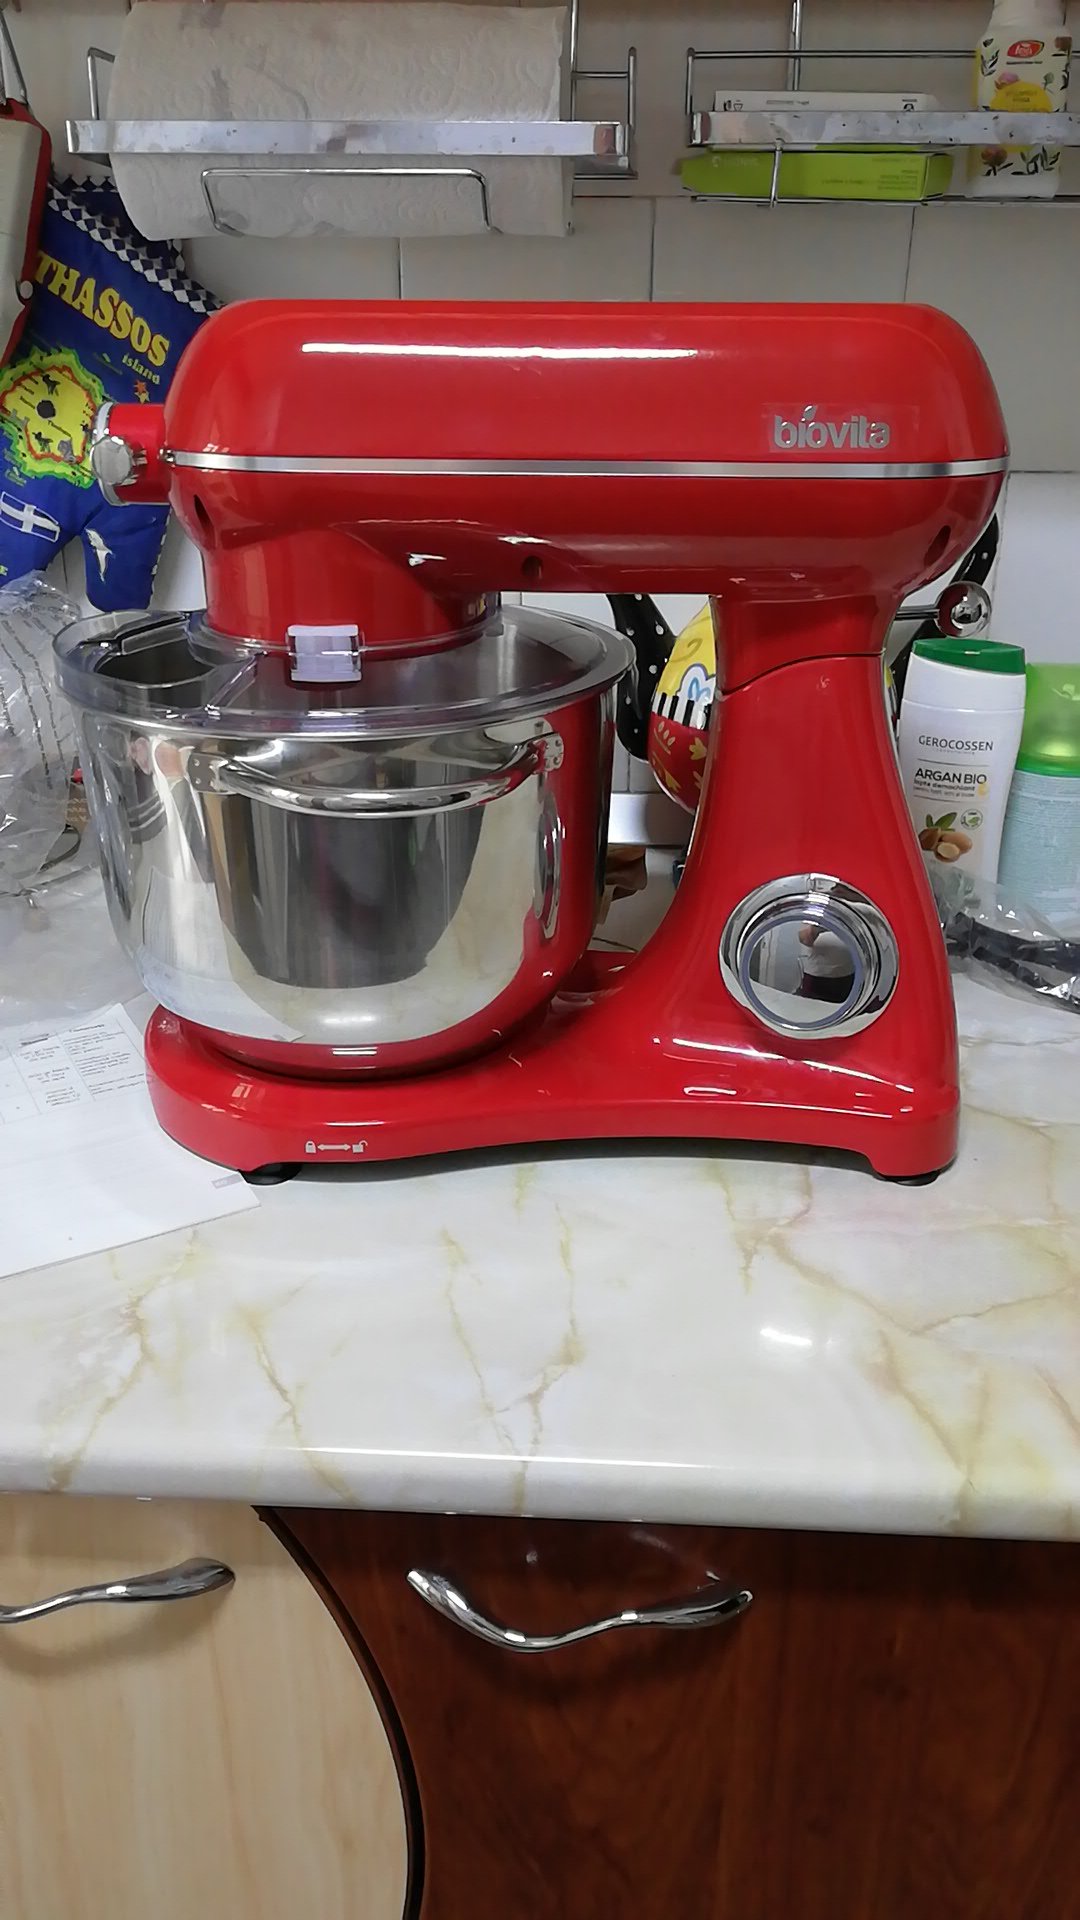 New PHISINIC SM-1522YM 6.5L 800W Household Stand Mixers,Tilt-Head Food Mixer